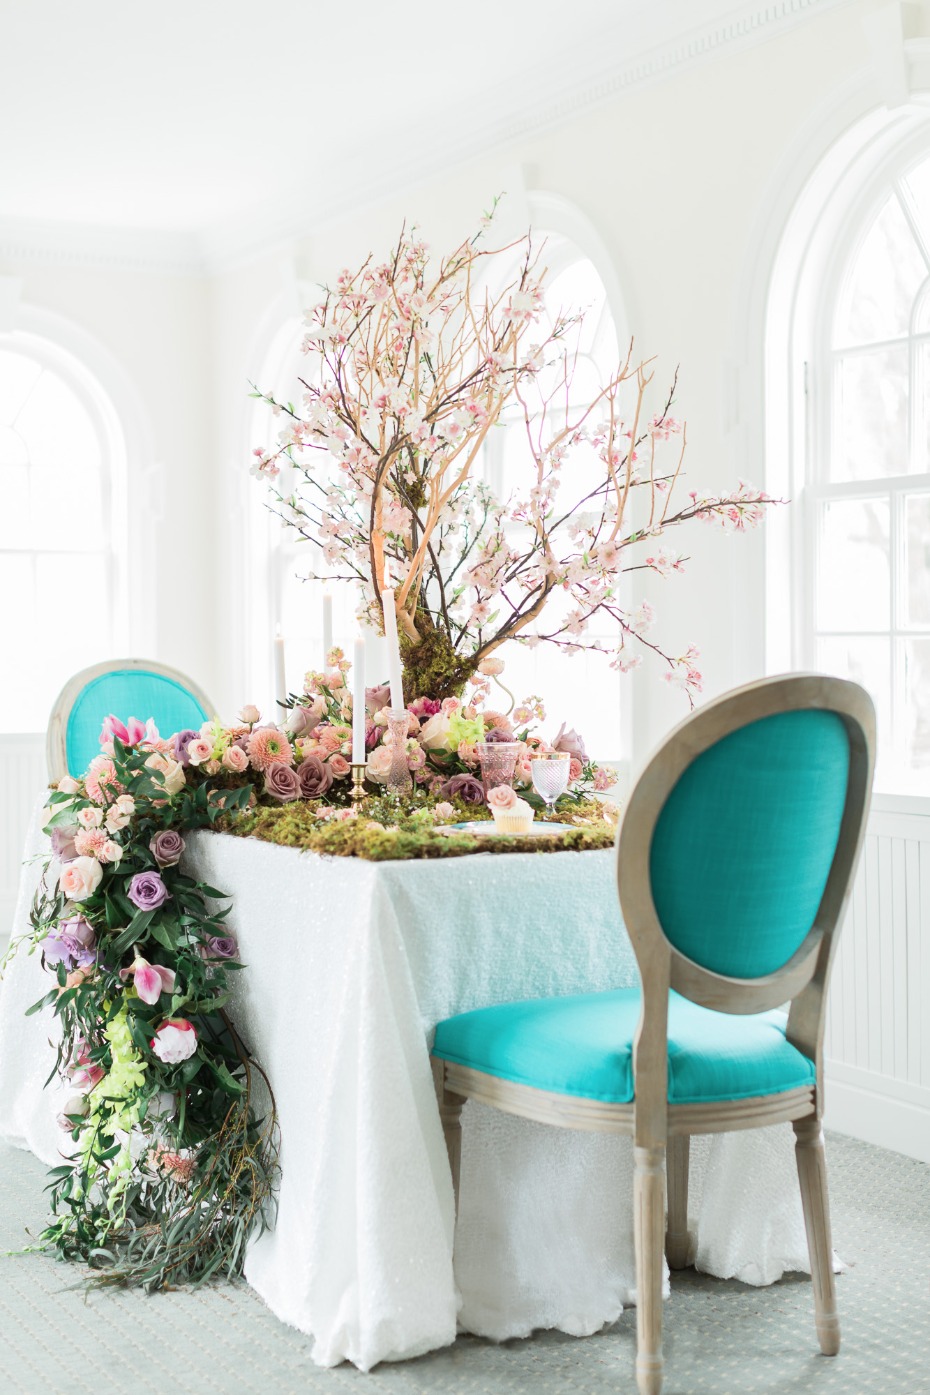 Teal chairs for this garden table setting